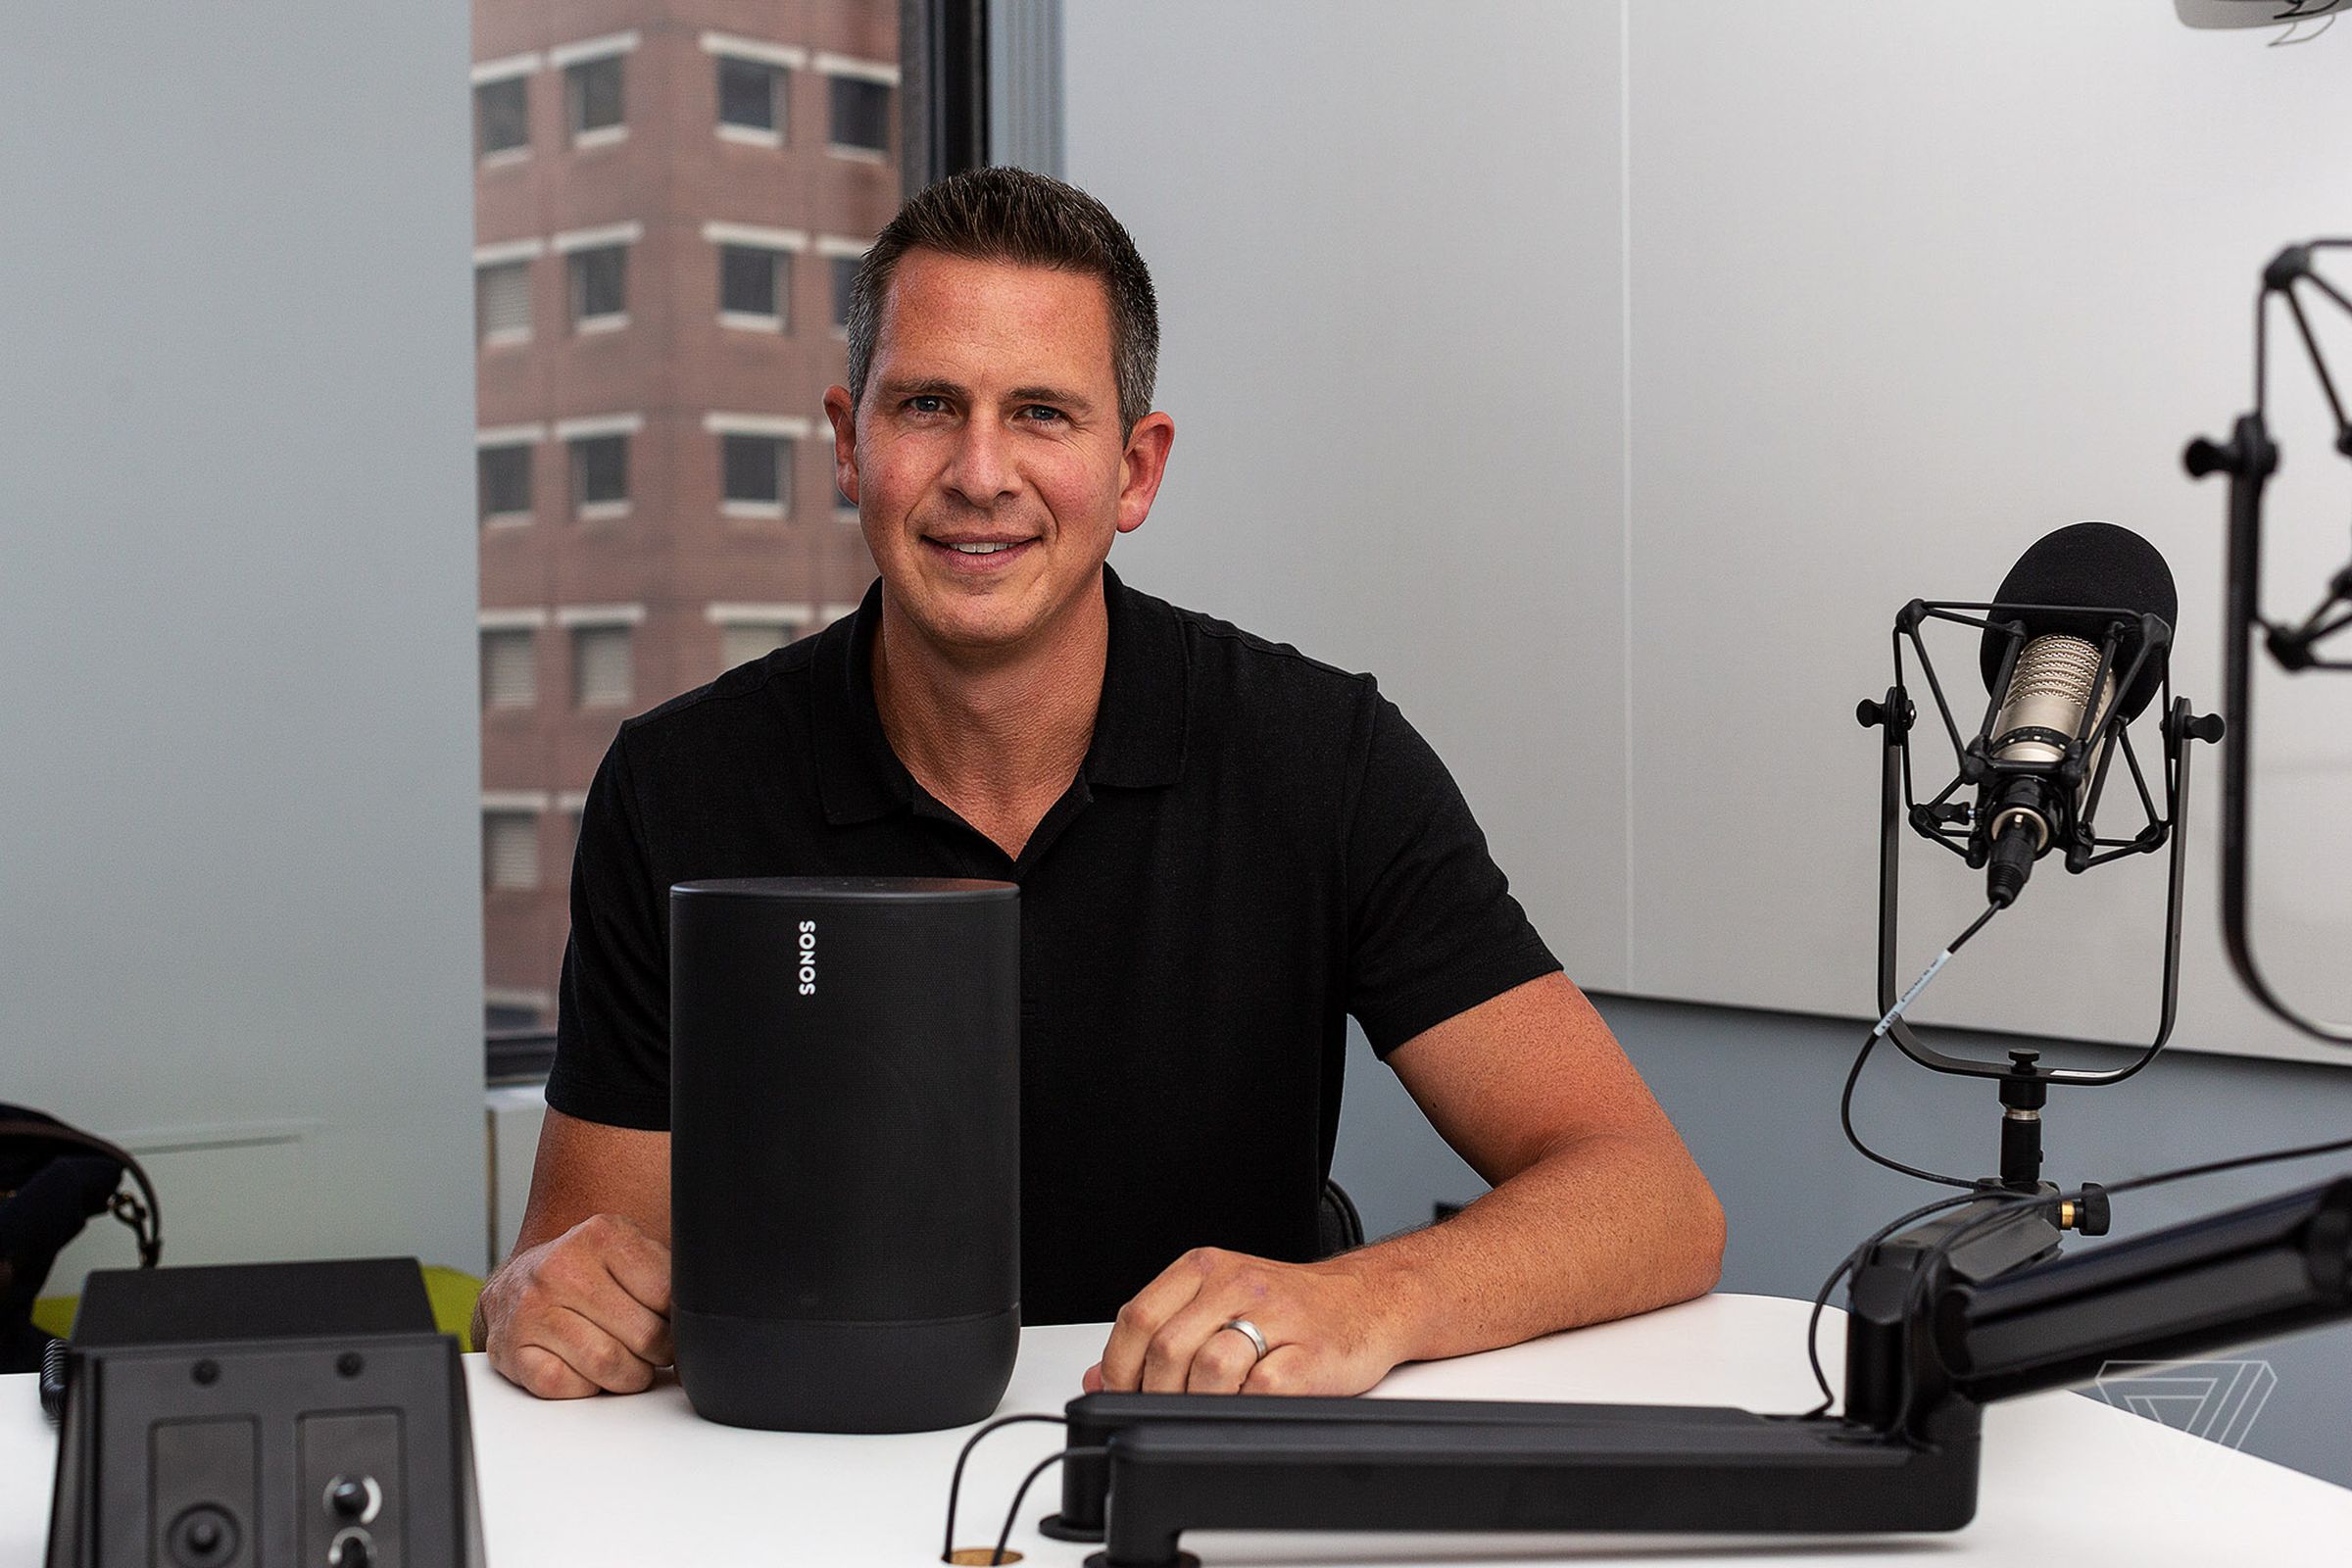 Sonos CEO Patrick Spence in August 2019, showing the then-new Sonos Move speaker.